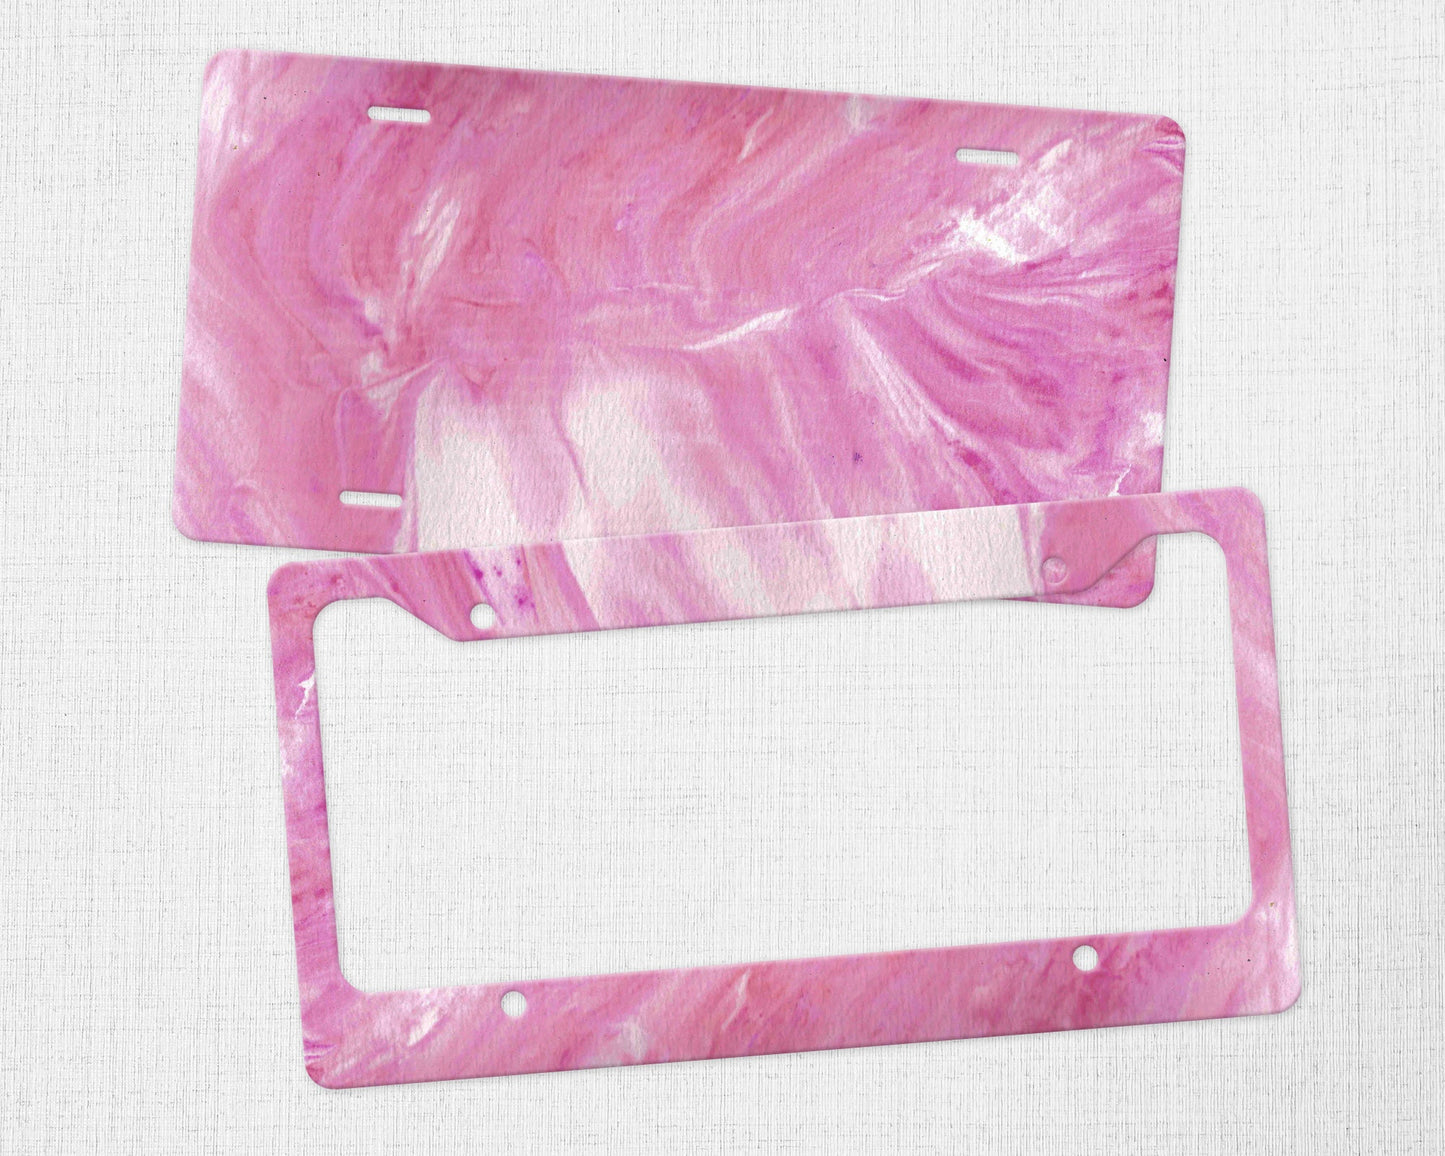 Pink Abstract License Plate - Breast Cancer, Gendercide, Women's Health, Paget's disease, Eosinophilic Diseases, Nursing Mothers